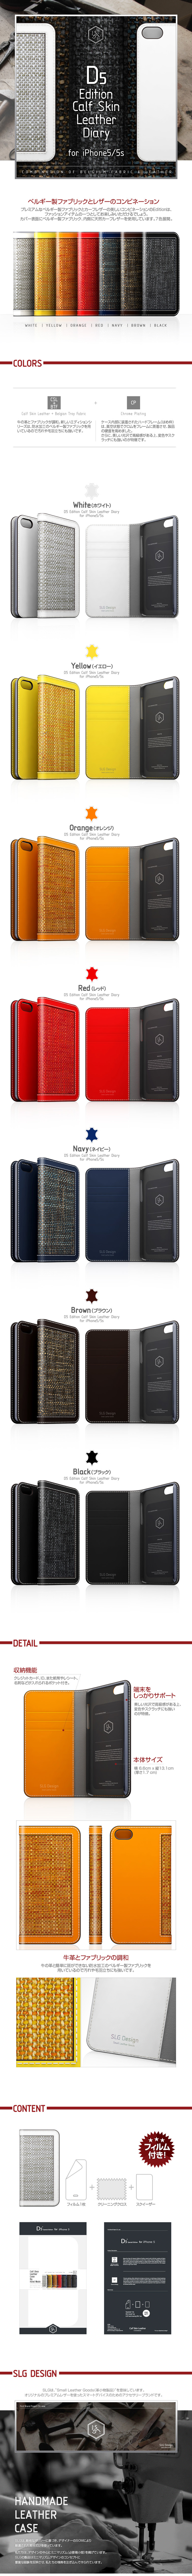 iPhone5/5s D4 Matal Leather Diary